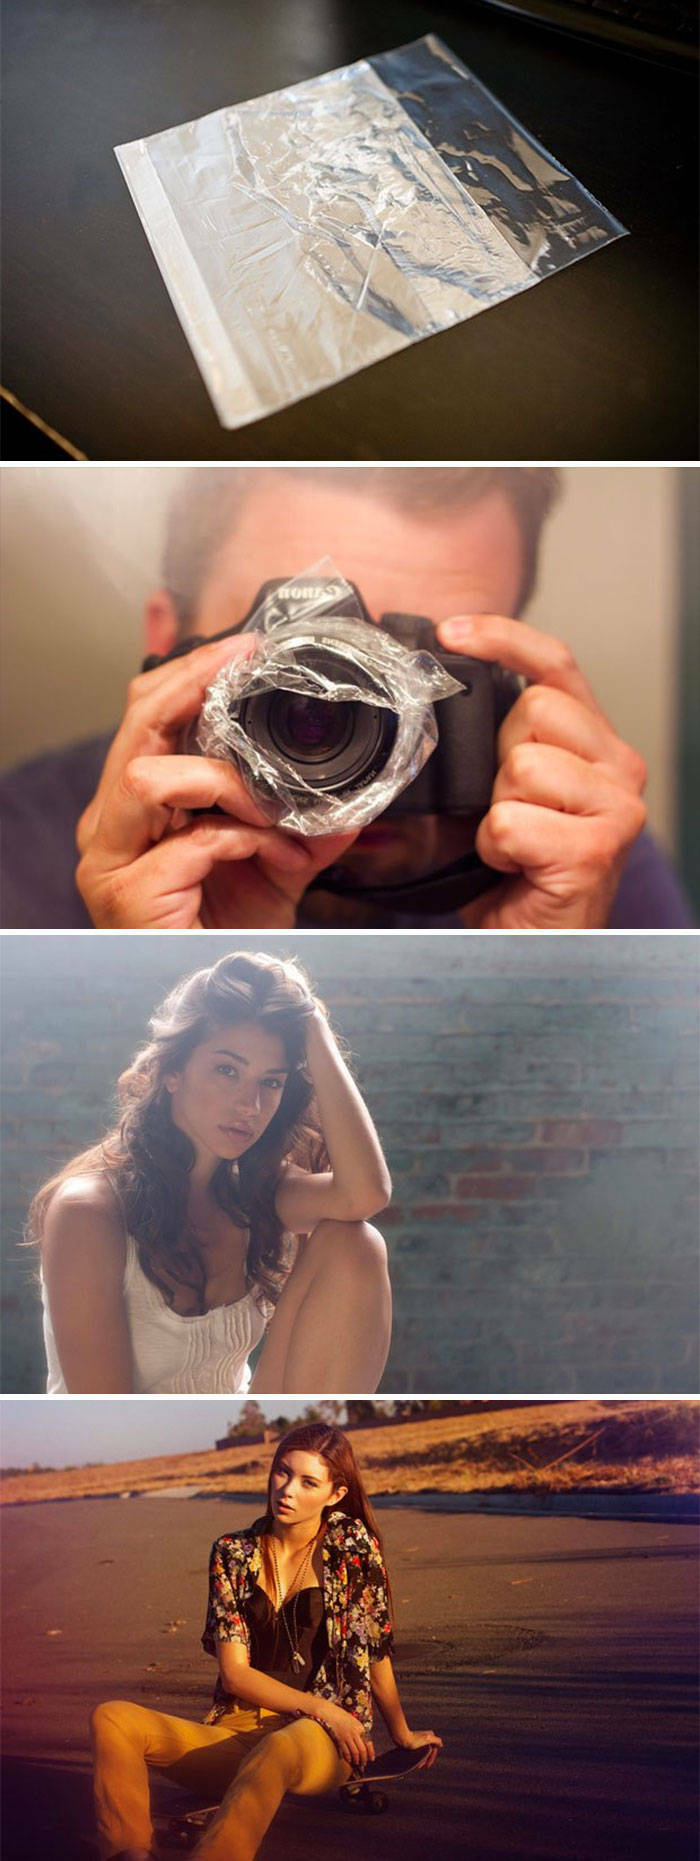 How To Take Perfect Photos With Barely Any Effort